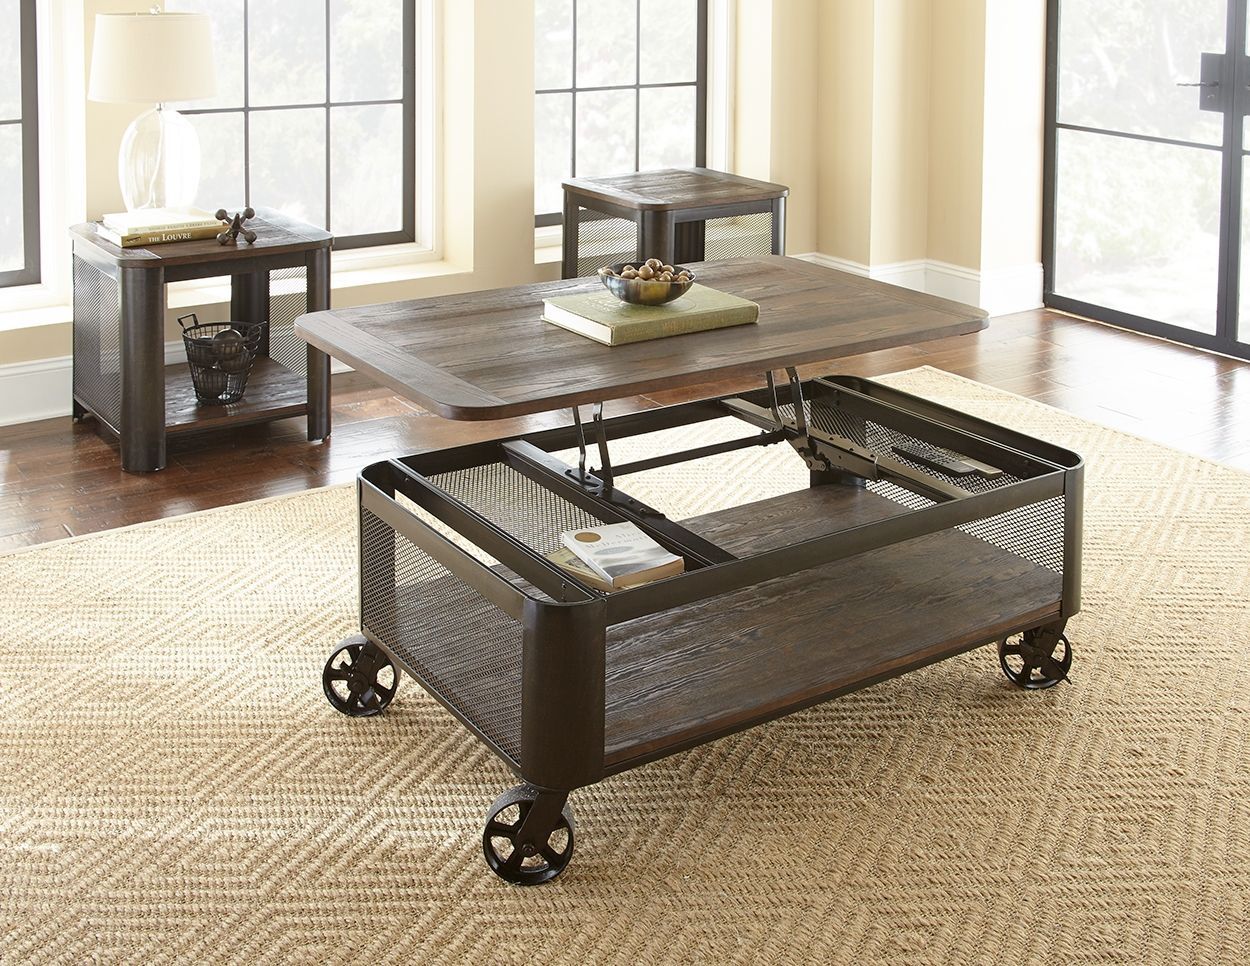 Clint Lift Top Table With Casters | Coffee Table With Wheels, Coffee Intended For Coffee Tables With Casters (Gallery 9 of 21)